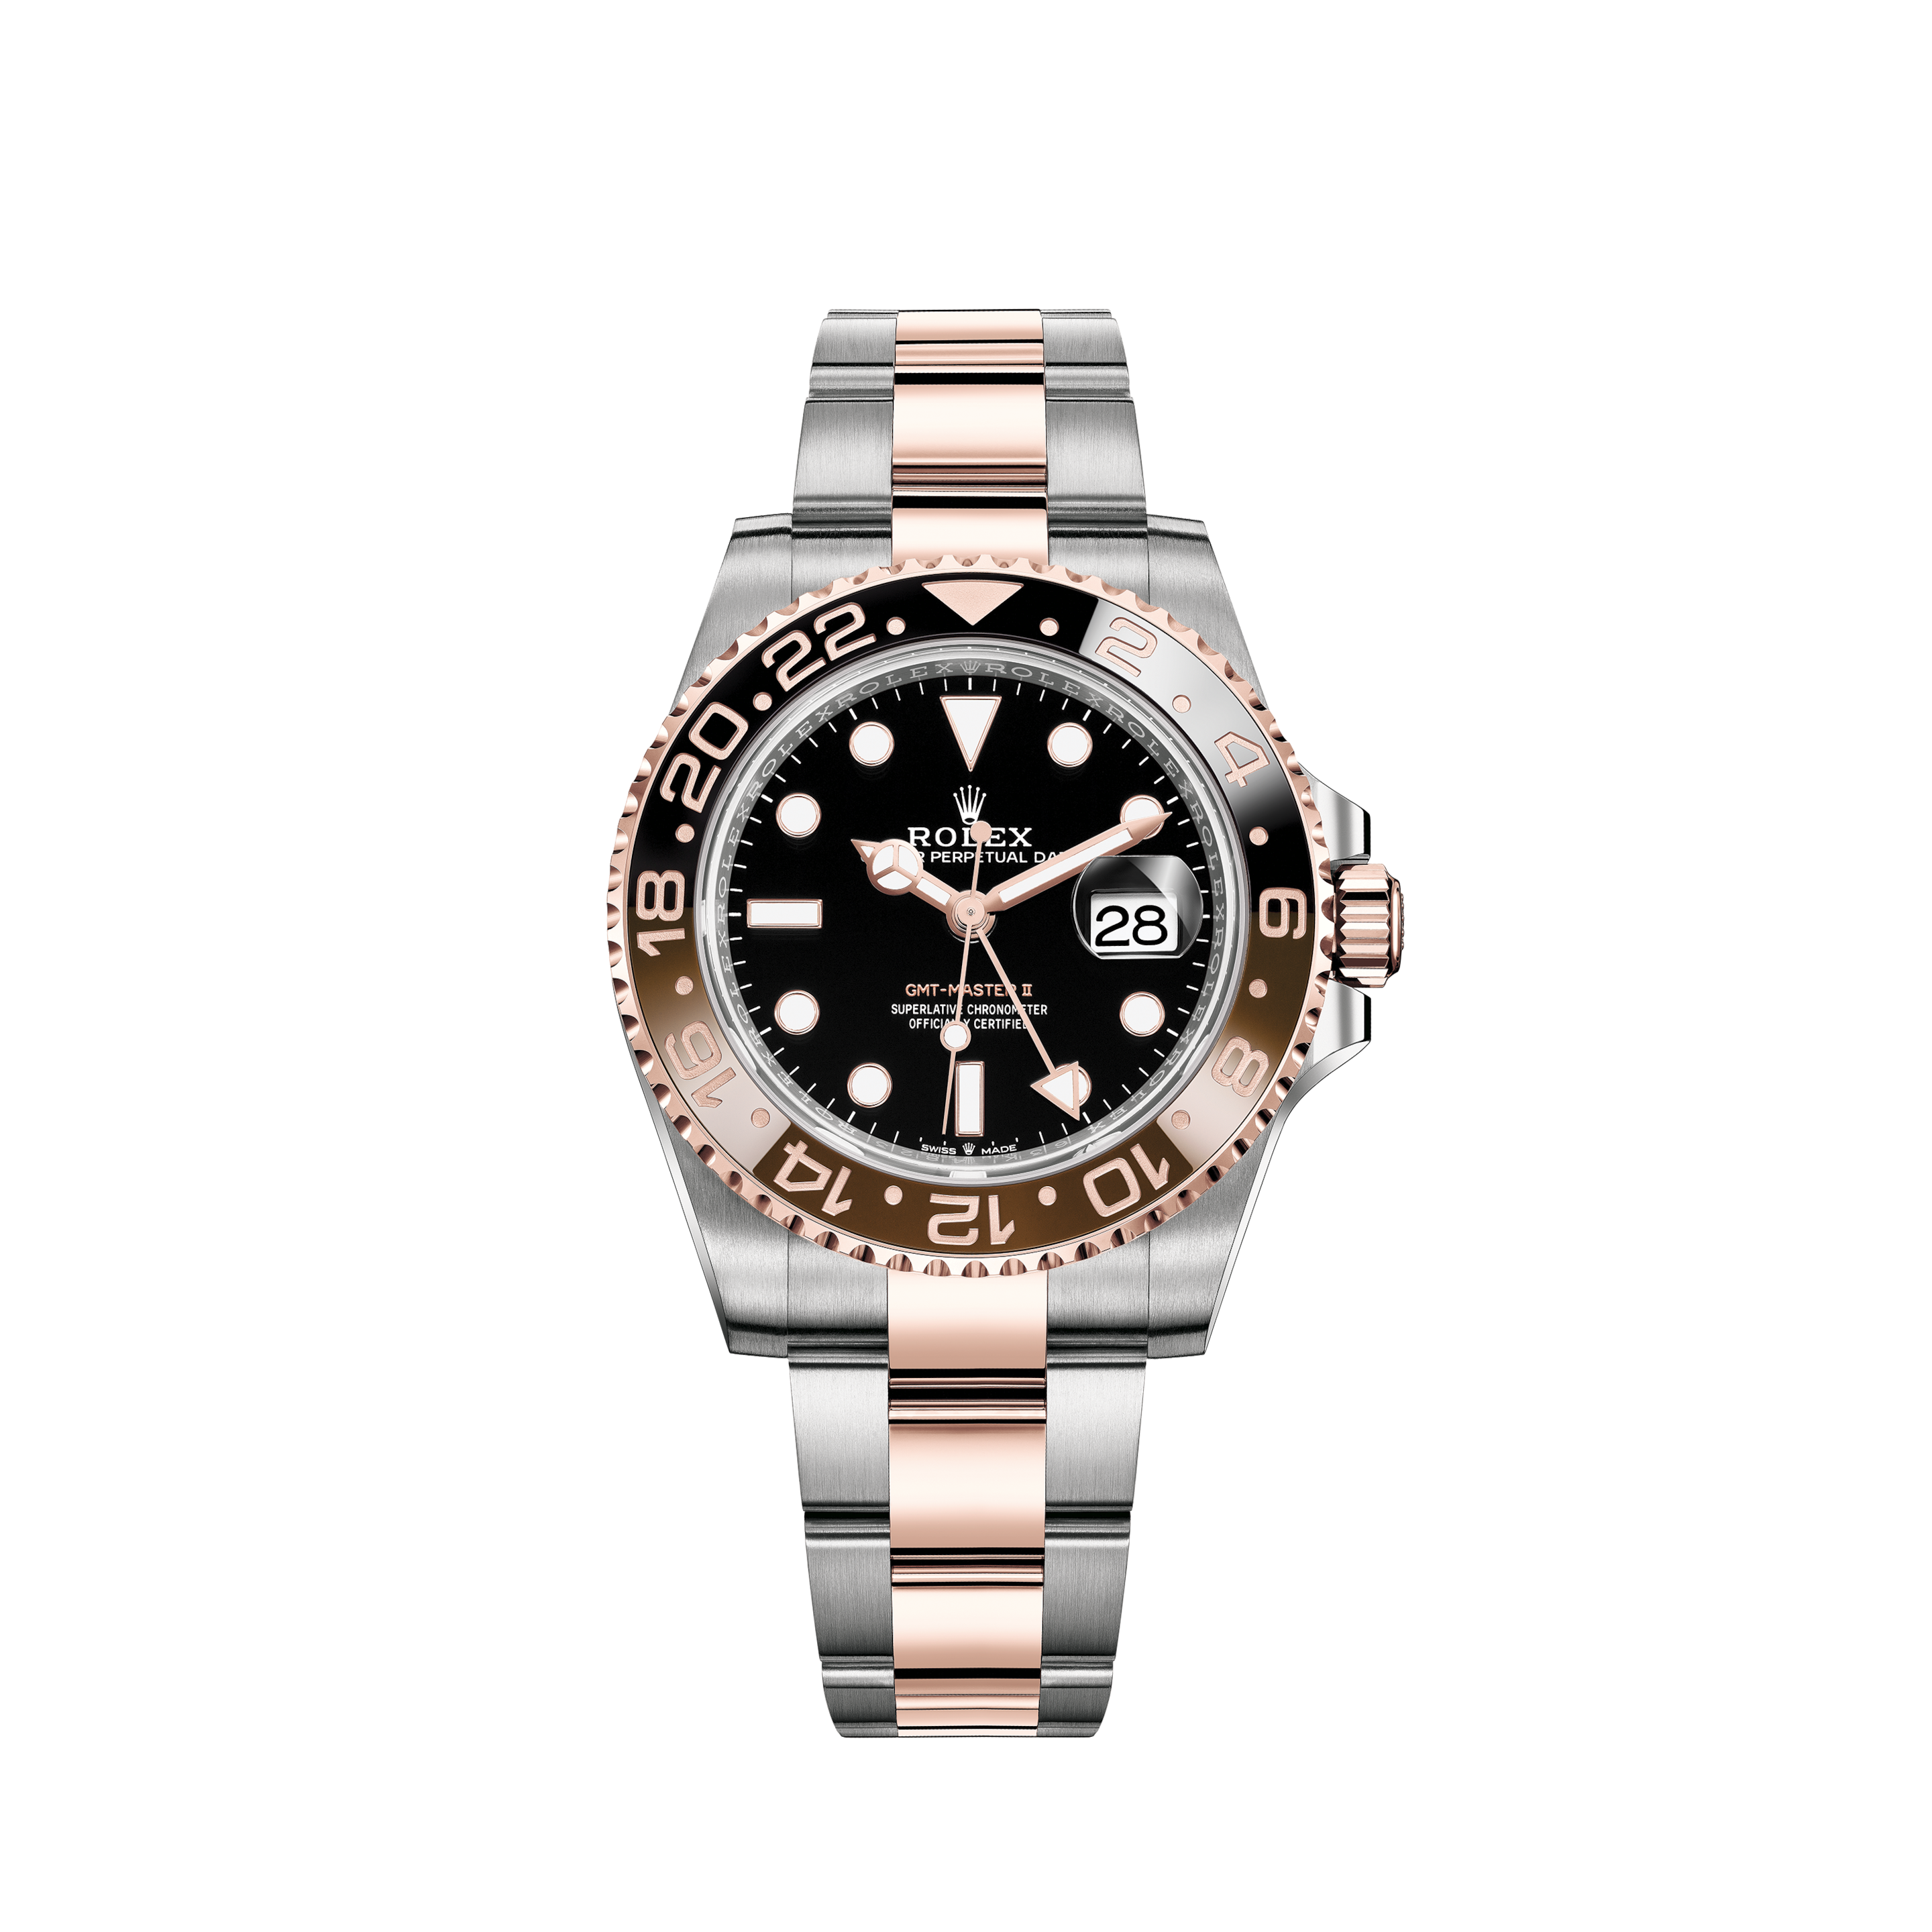 rolex oyster perpetual gmt master superlative chronometer officially certified